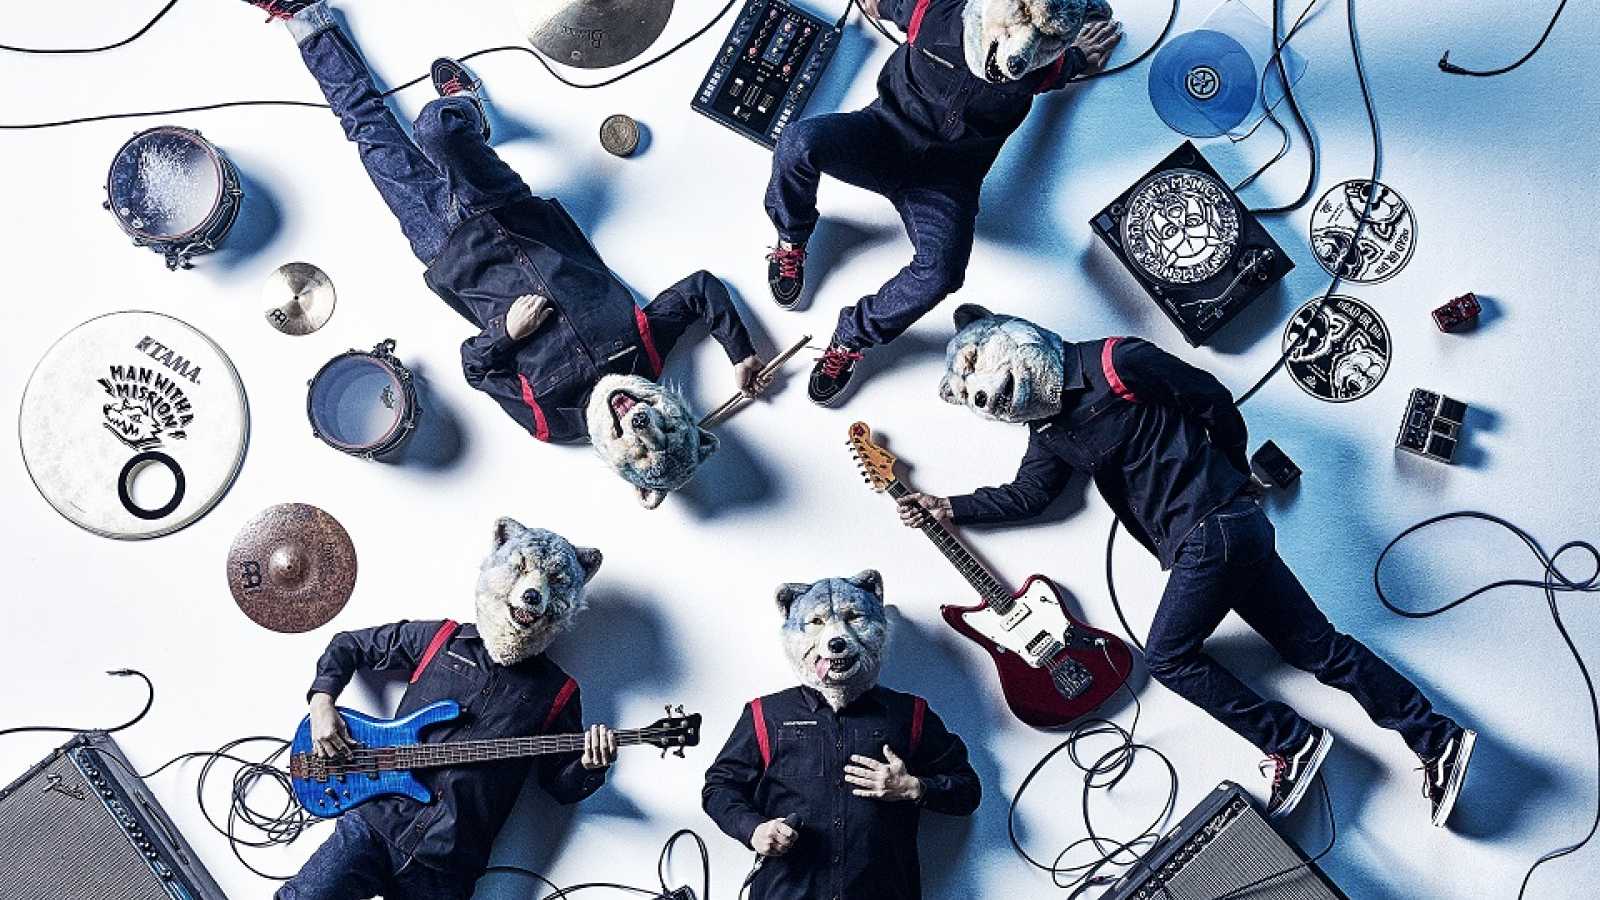 Playlisty JaME: jrock © MAN WITH A MISSION. All rights reserved.